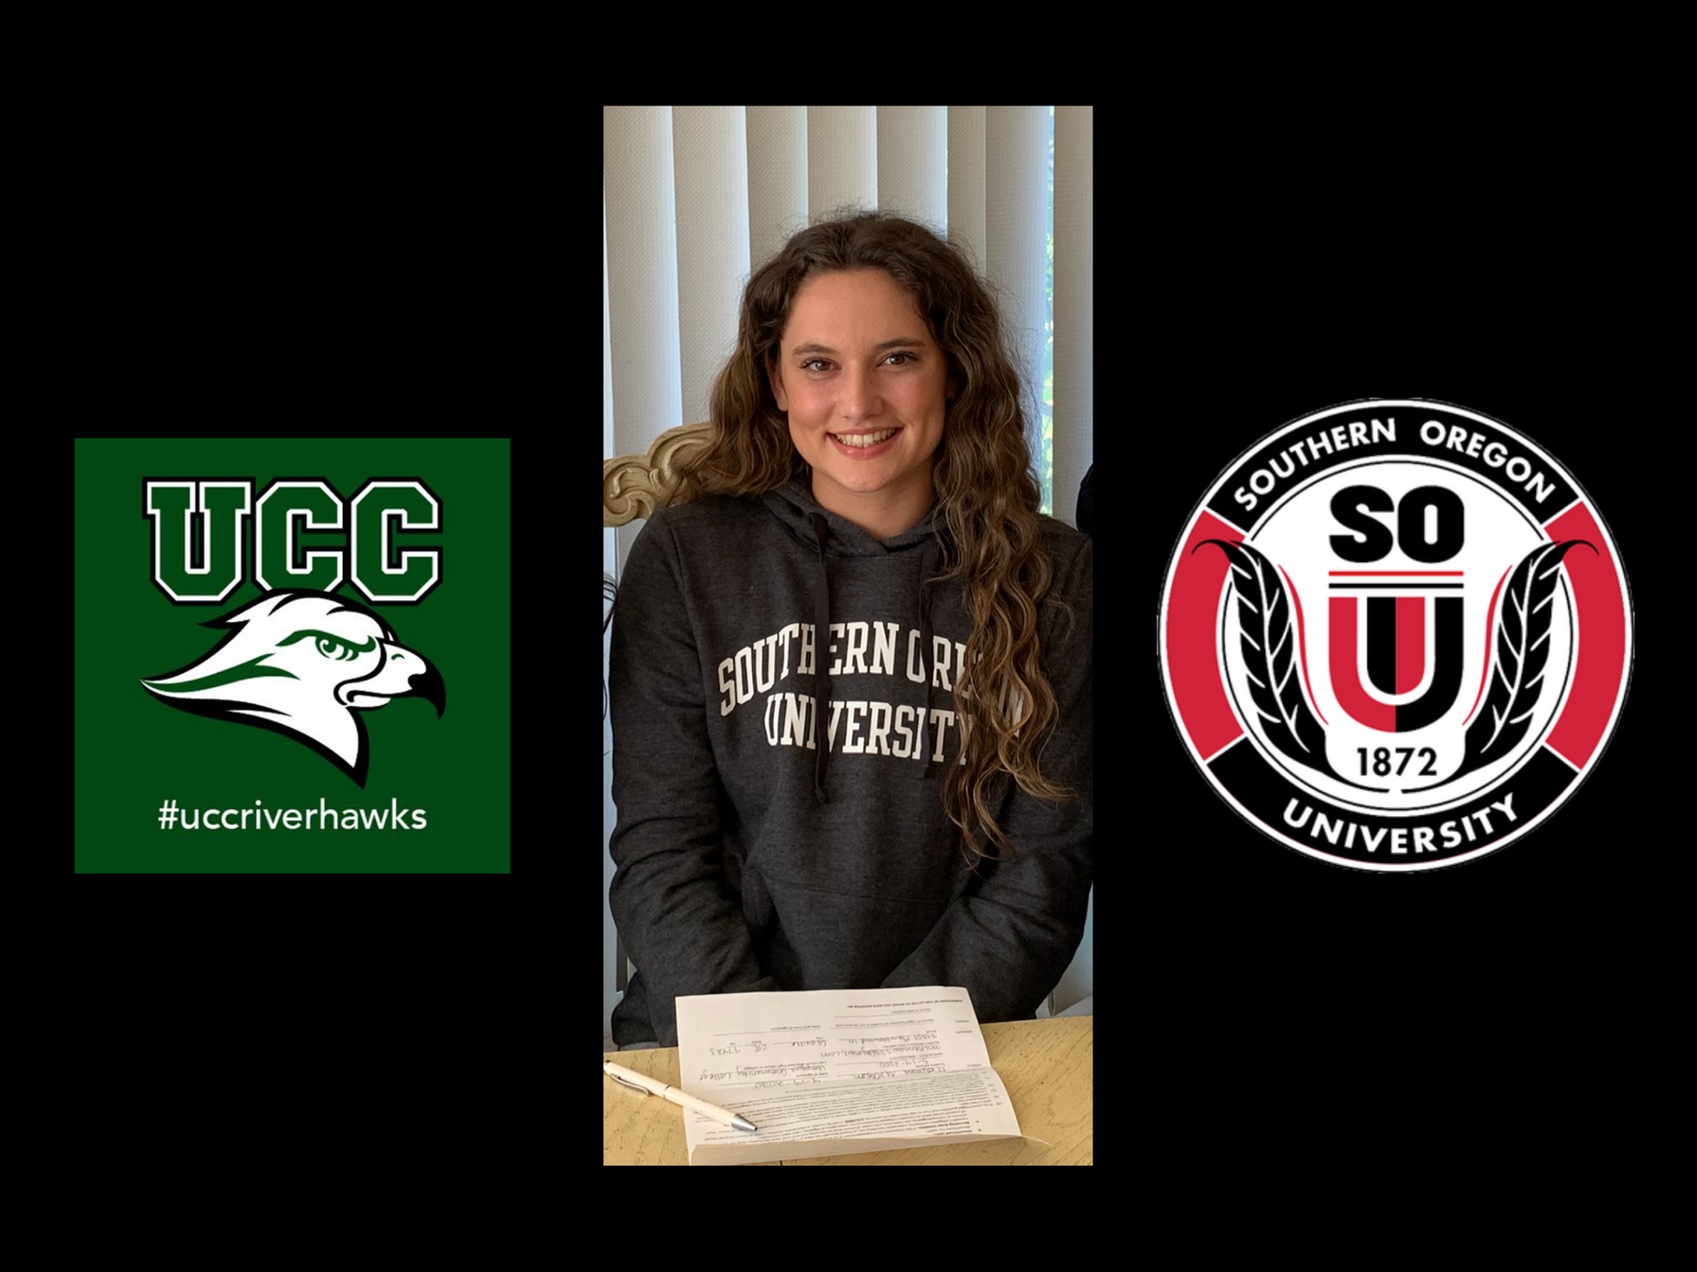 McKenna Wilson will continue track career at Southern Oregon